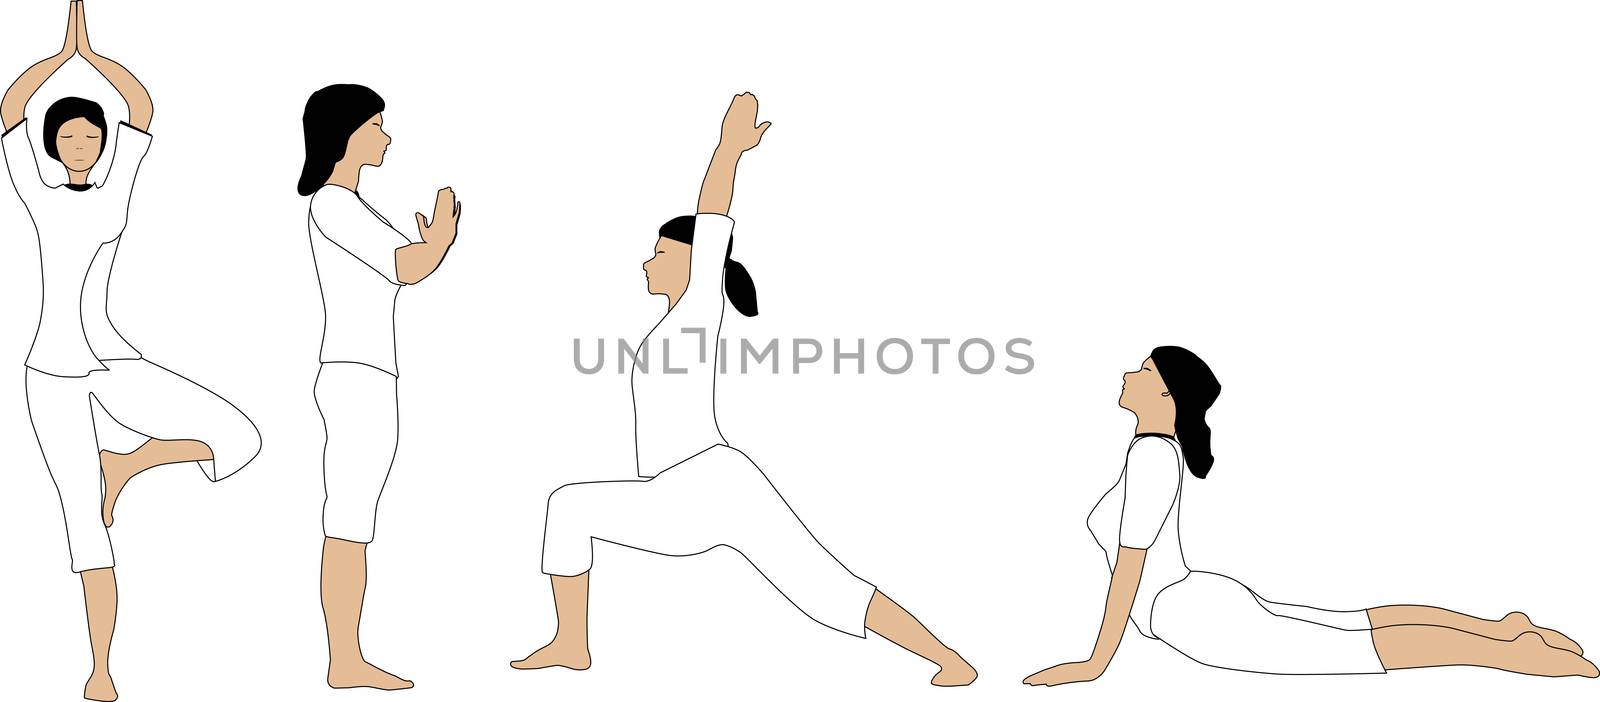 A set of yoga poses with no meshes or similar for easy editing.